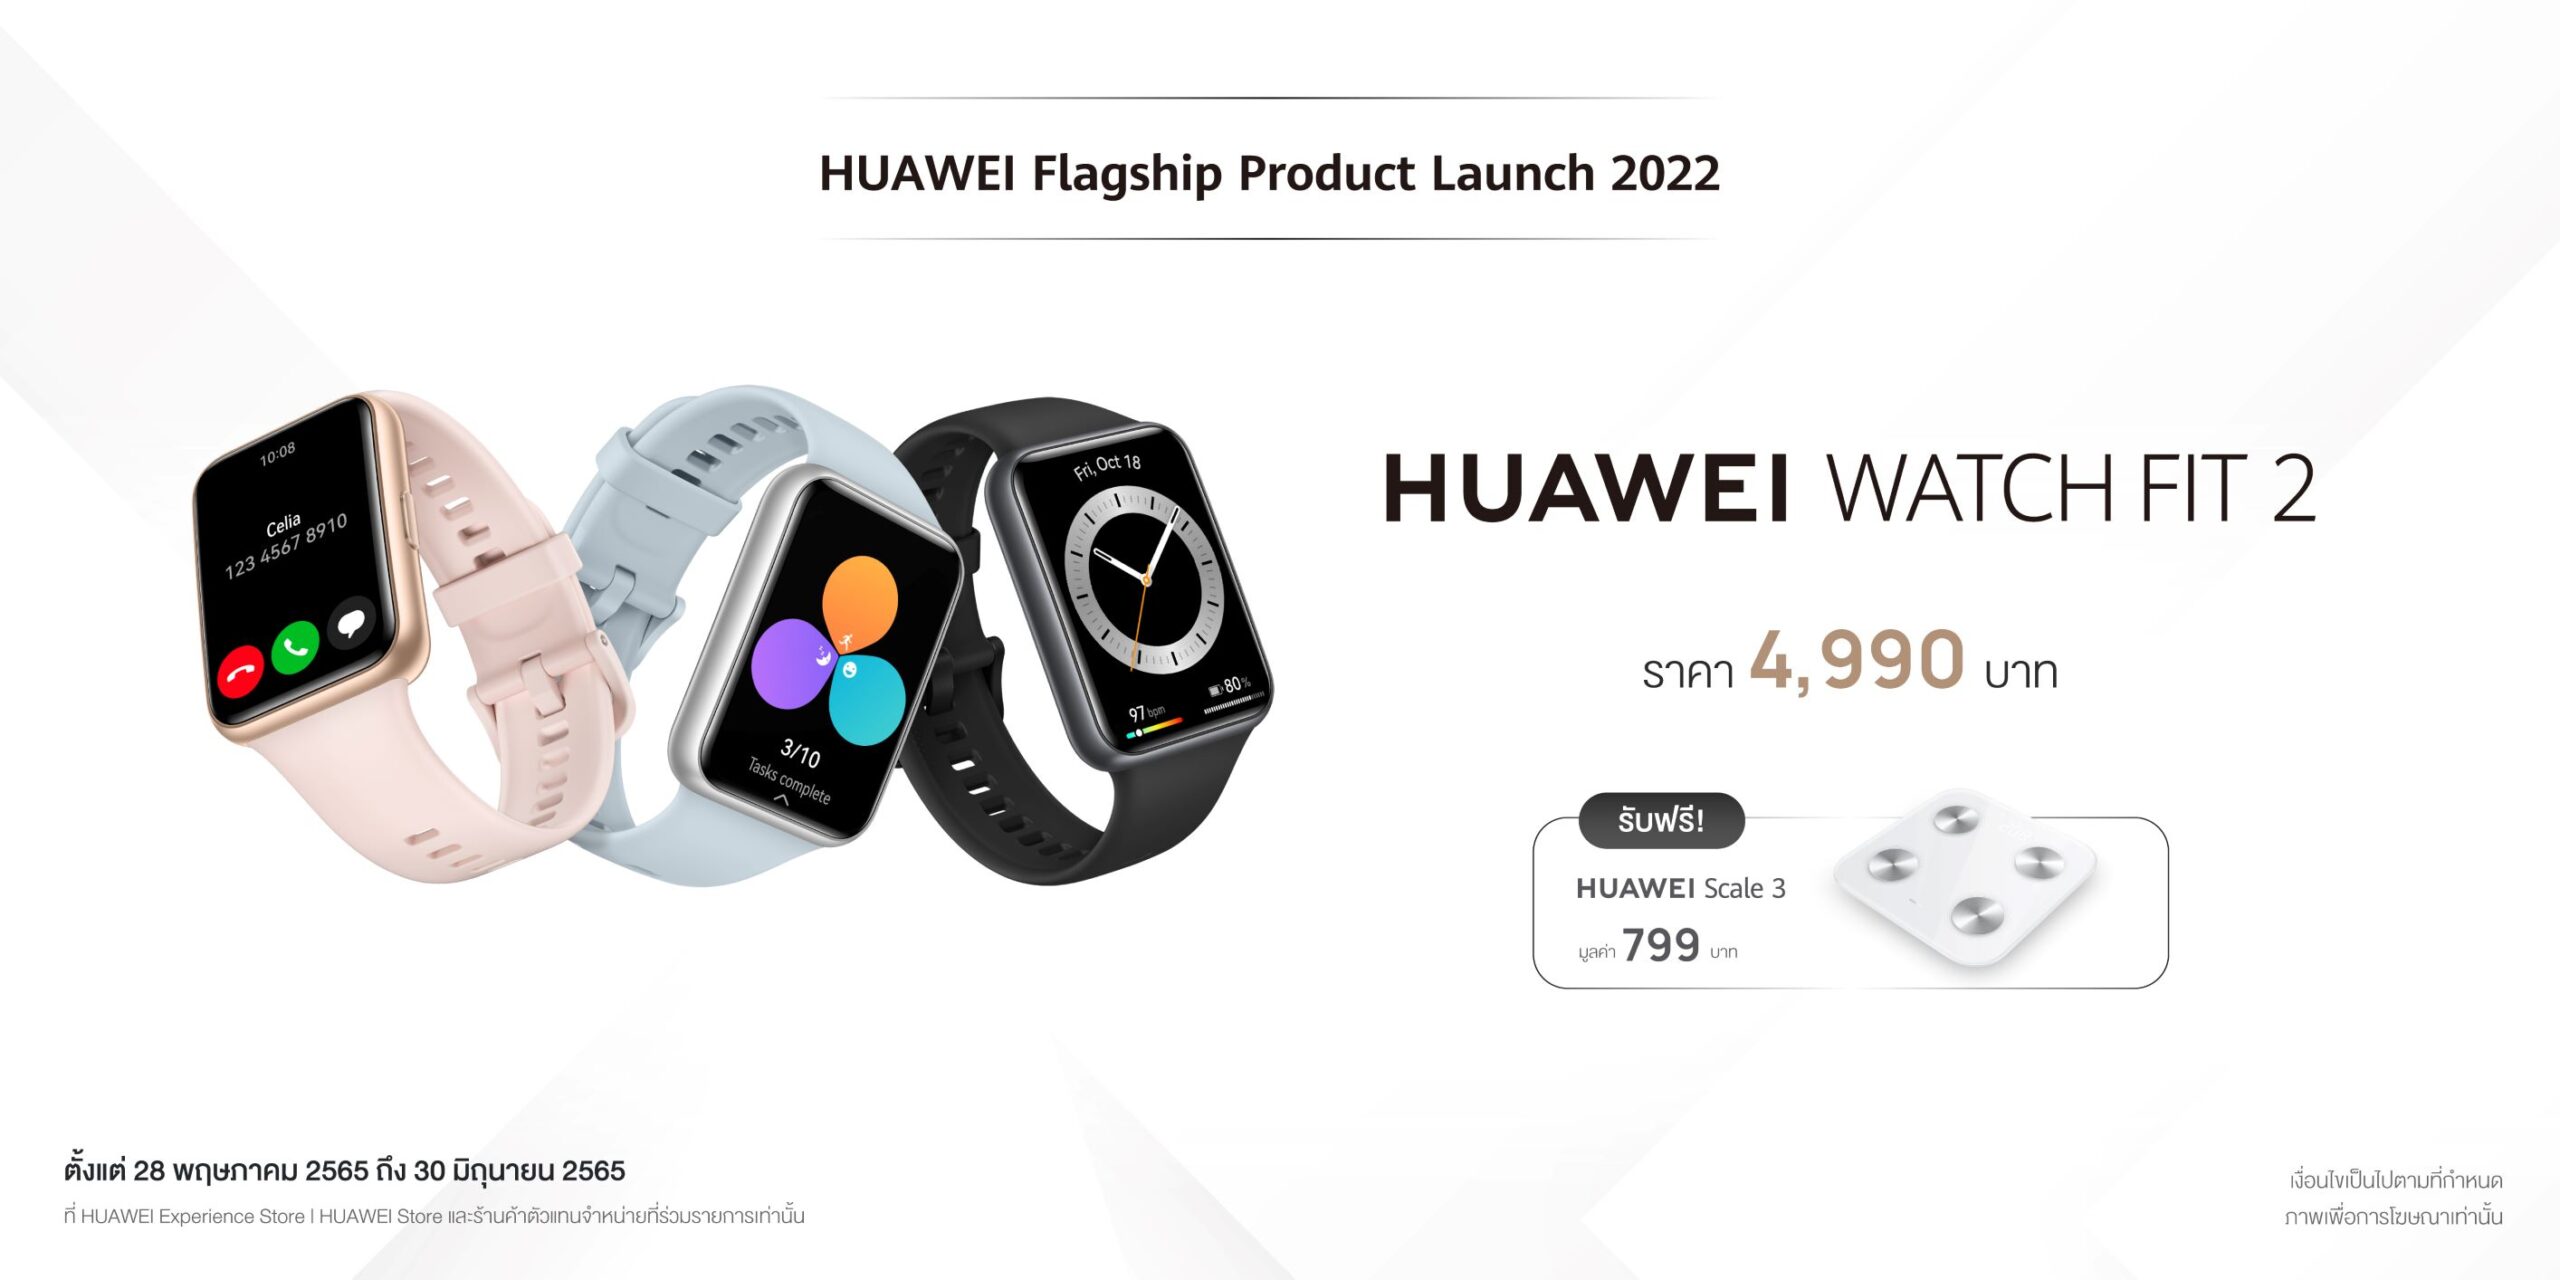 HUAWEI-WATCH-FIT-2 Price